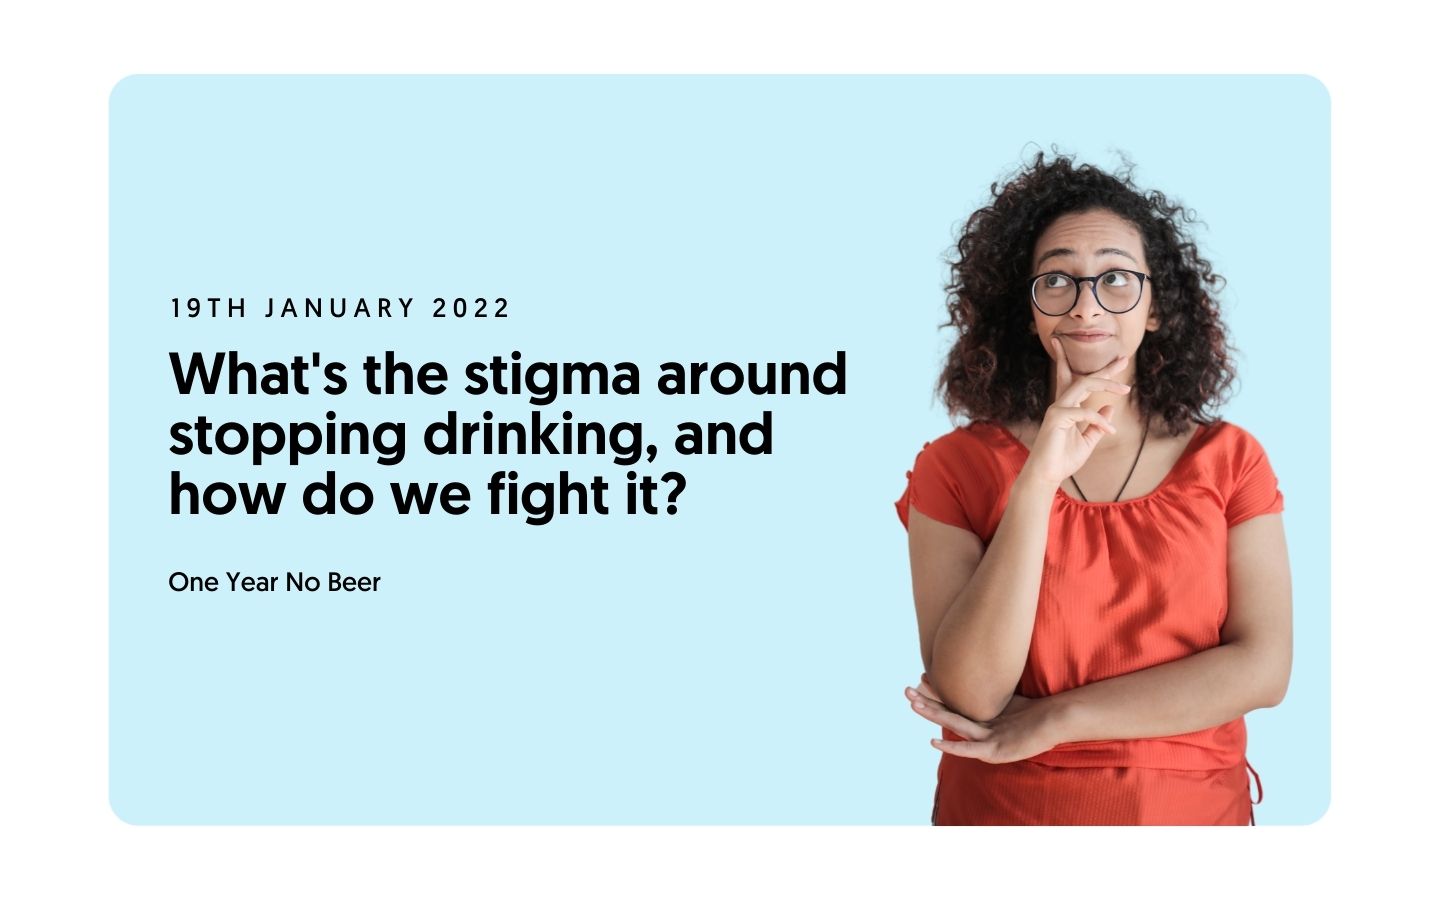 What's the stigma around stopping drinking, and how do we fight it?